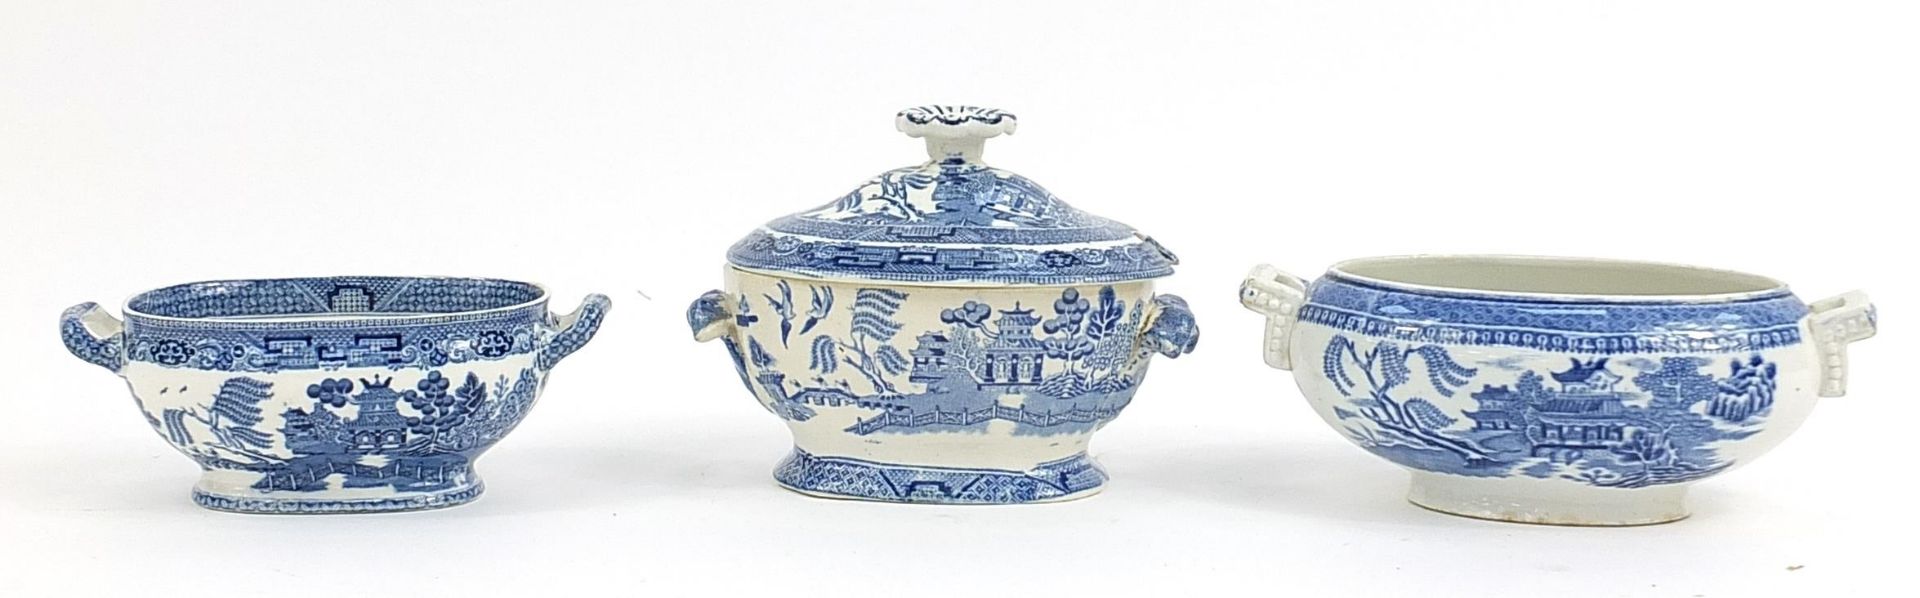 Old blue and white Willow pattern tureens, covers and stands, the largest 20cm wide - Bild 2 aus 4